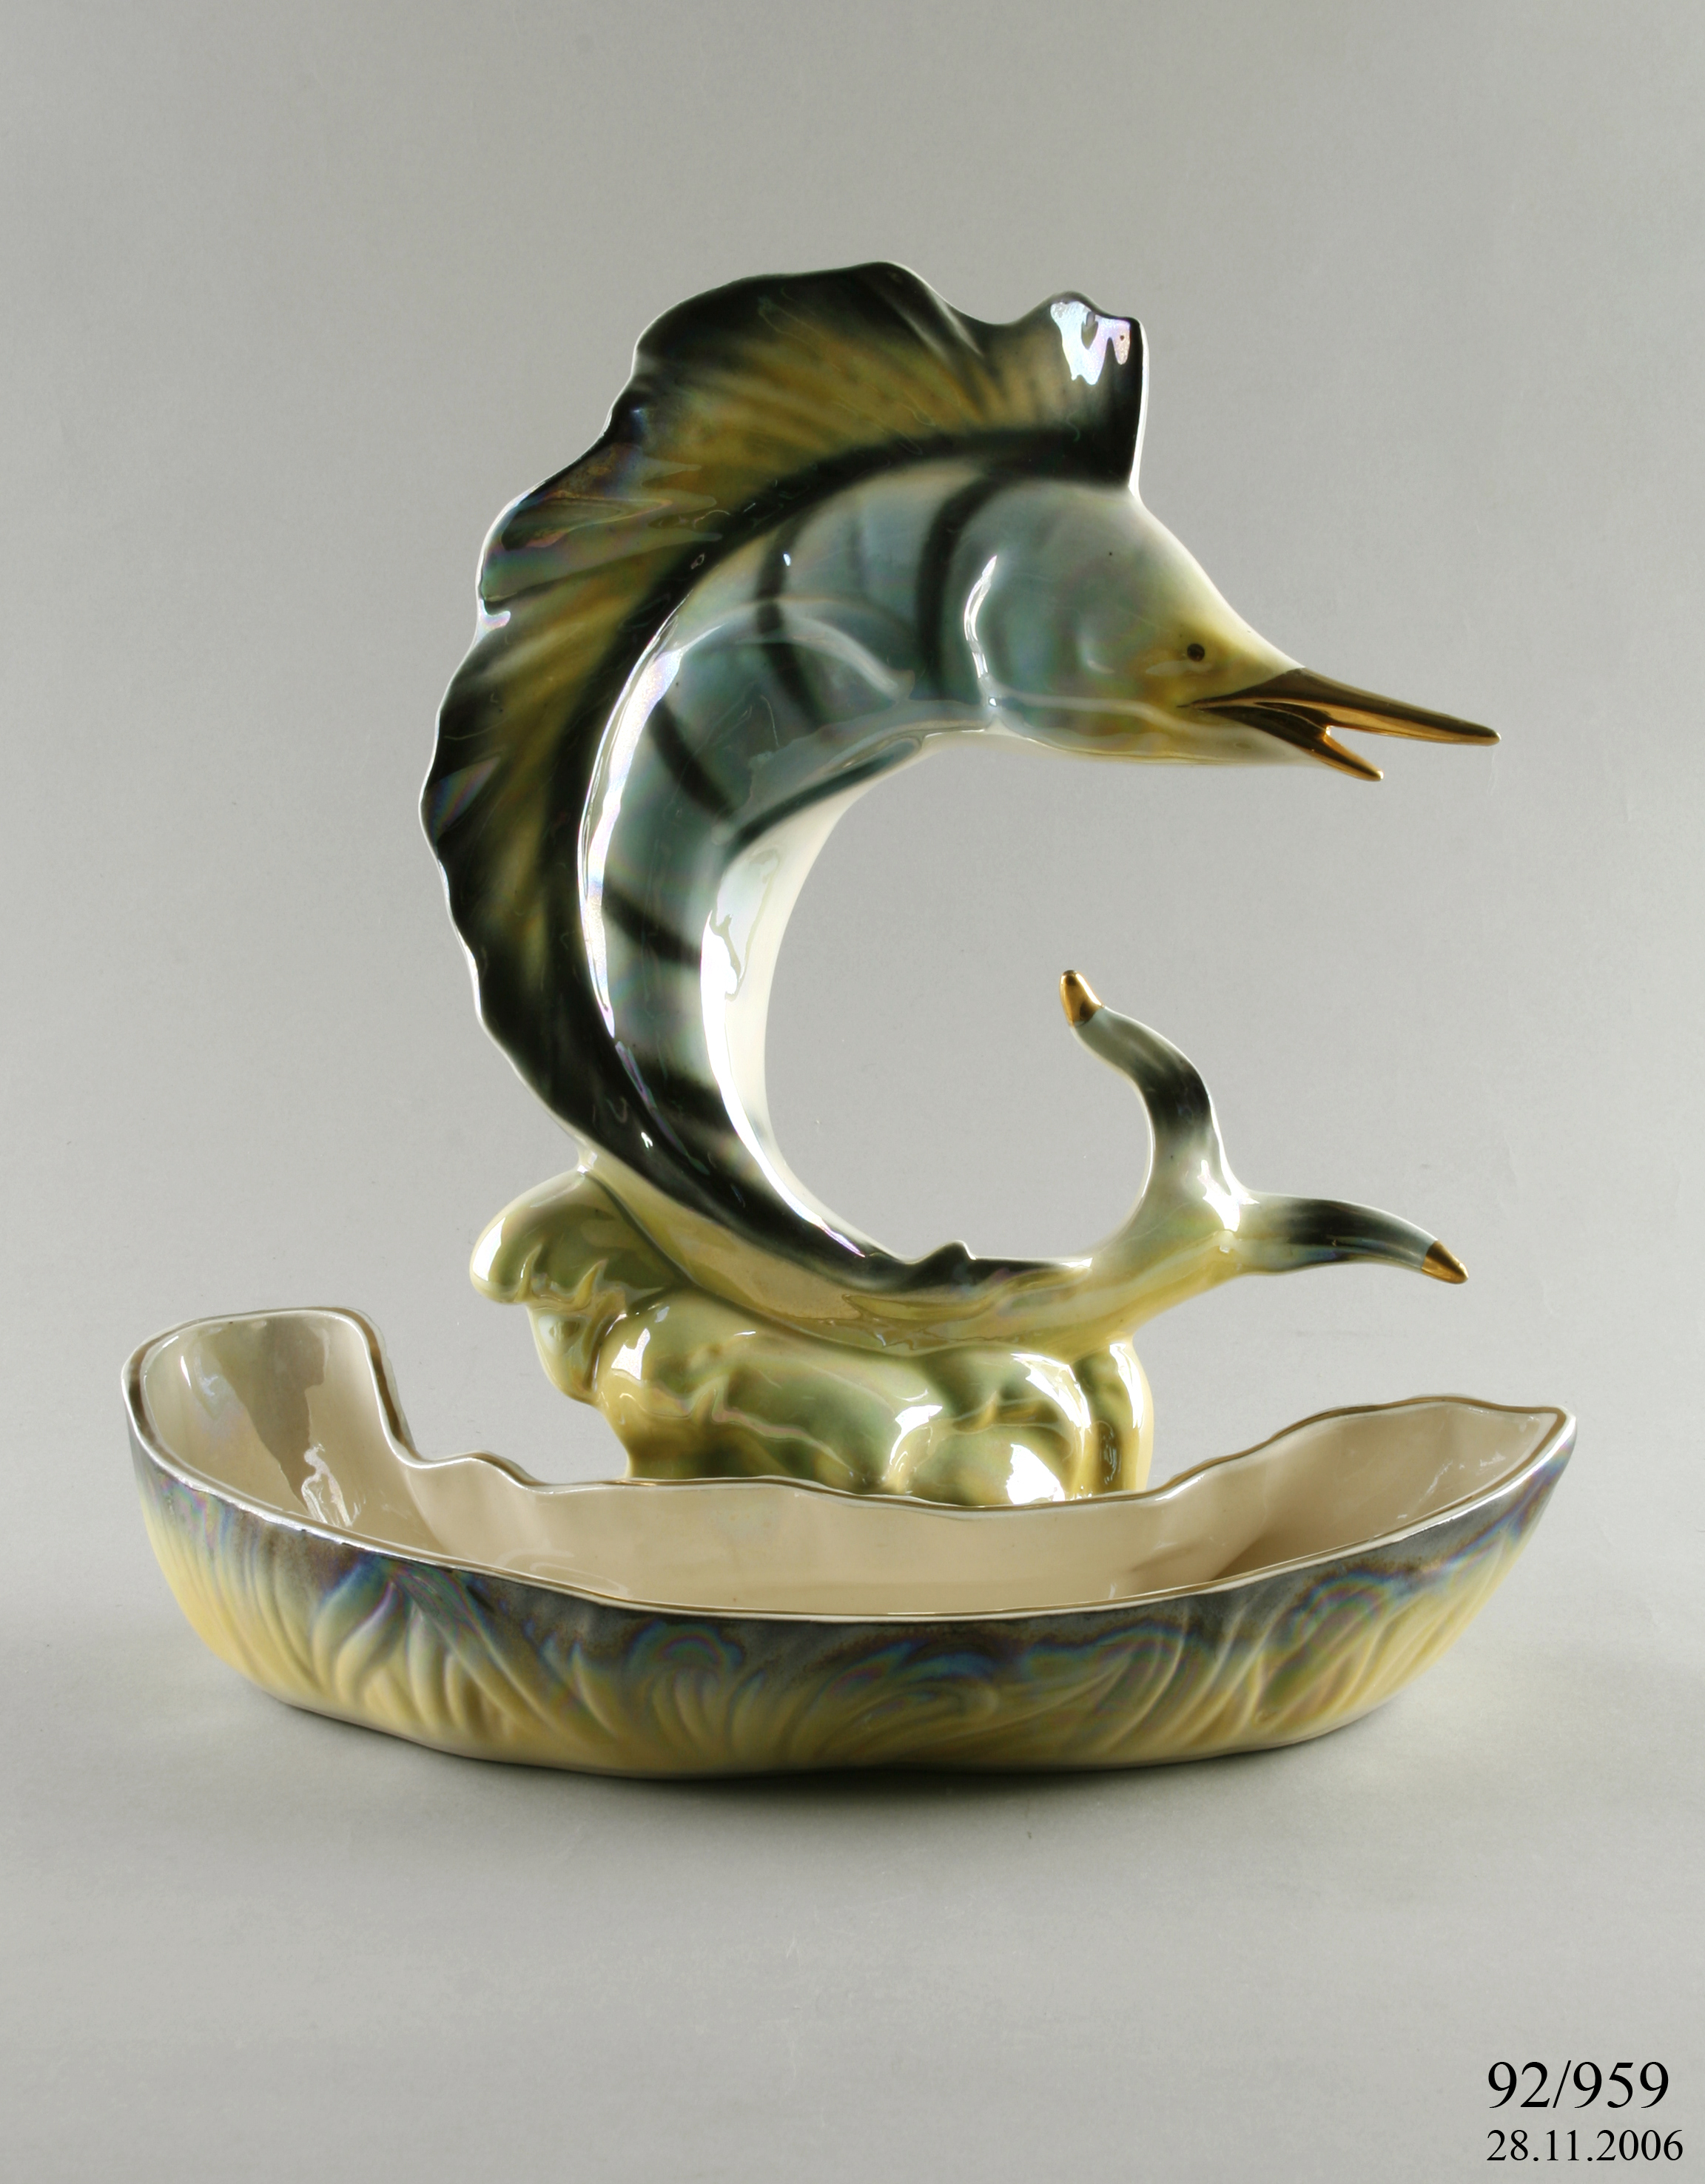 A Pates Potteries centrepiece vase in the shape of a swordfish.